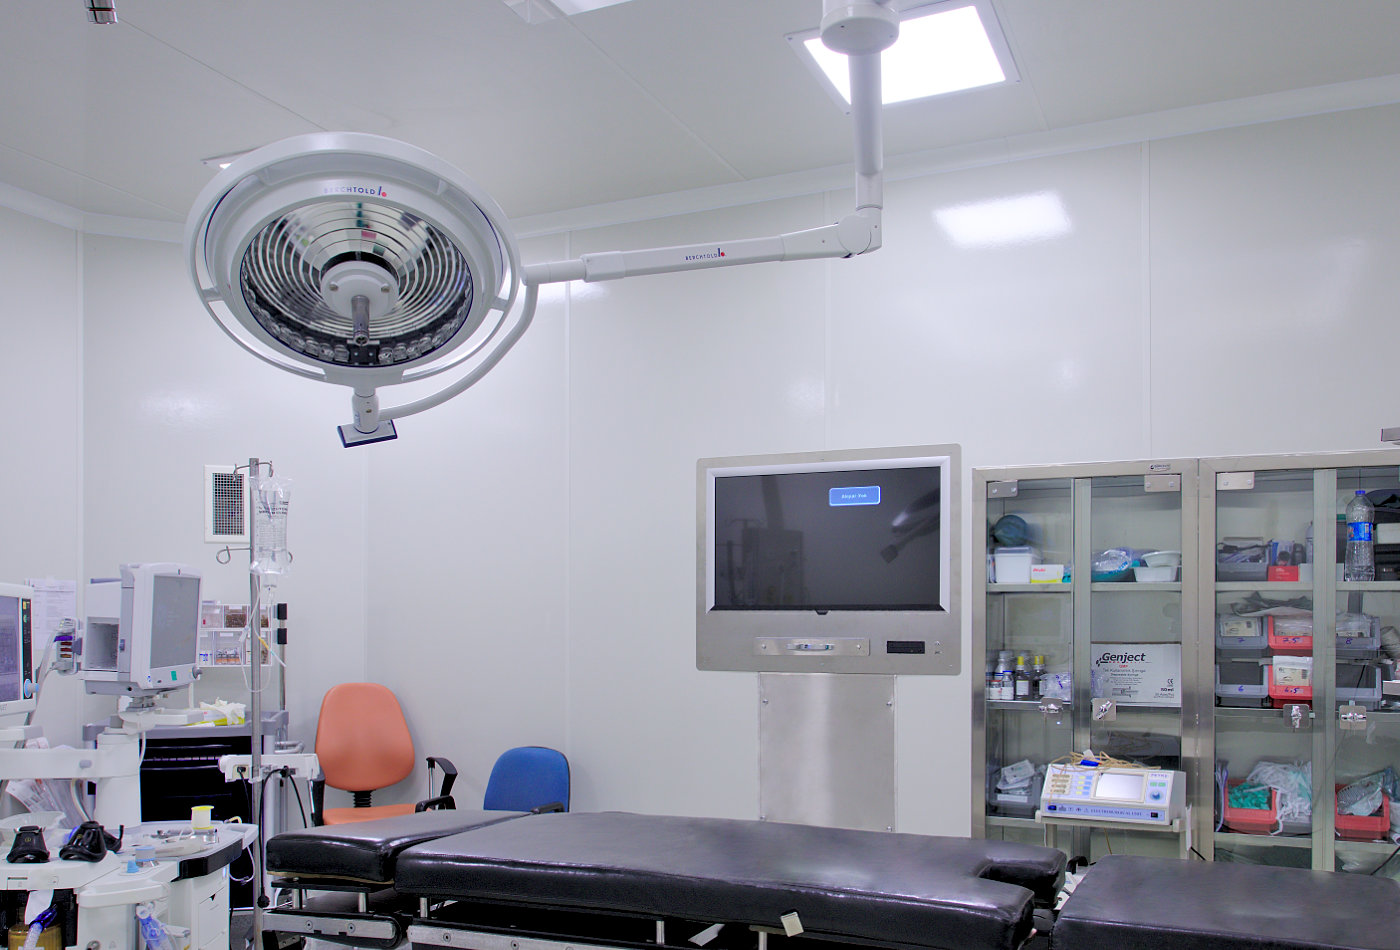 University surgery rooms GRP hygienic walls, dropped ceilings